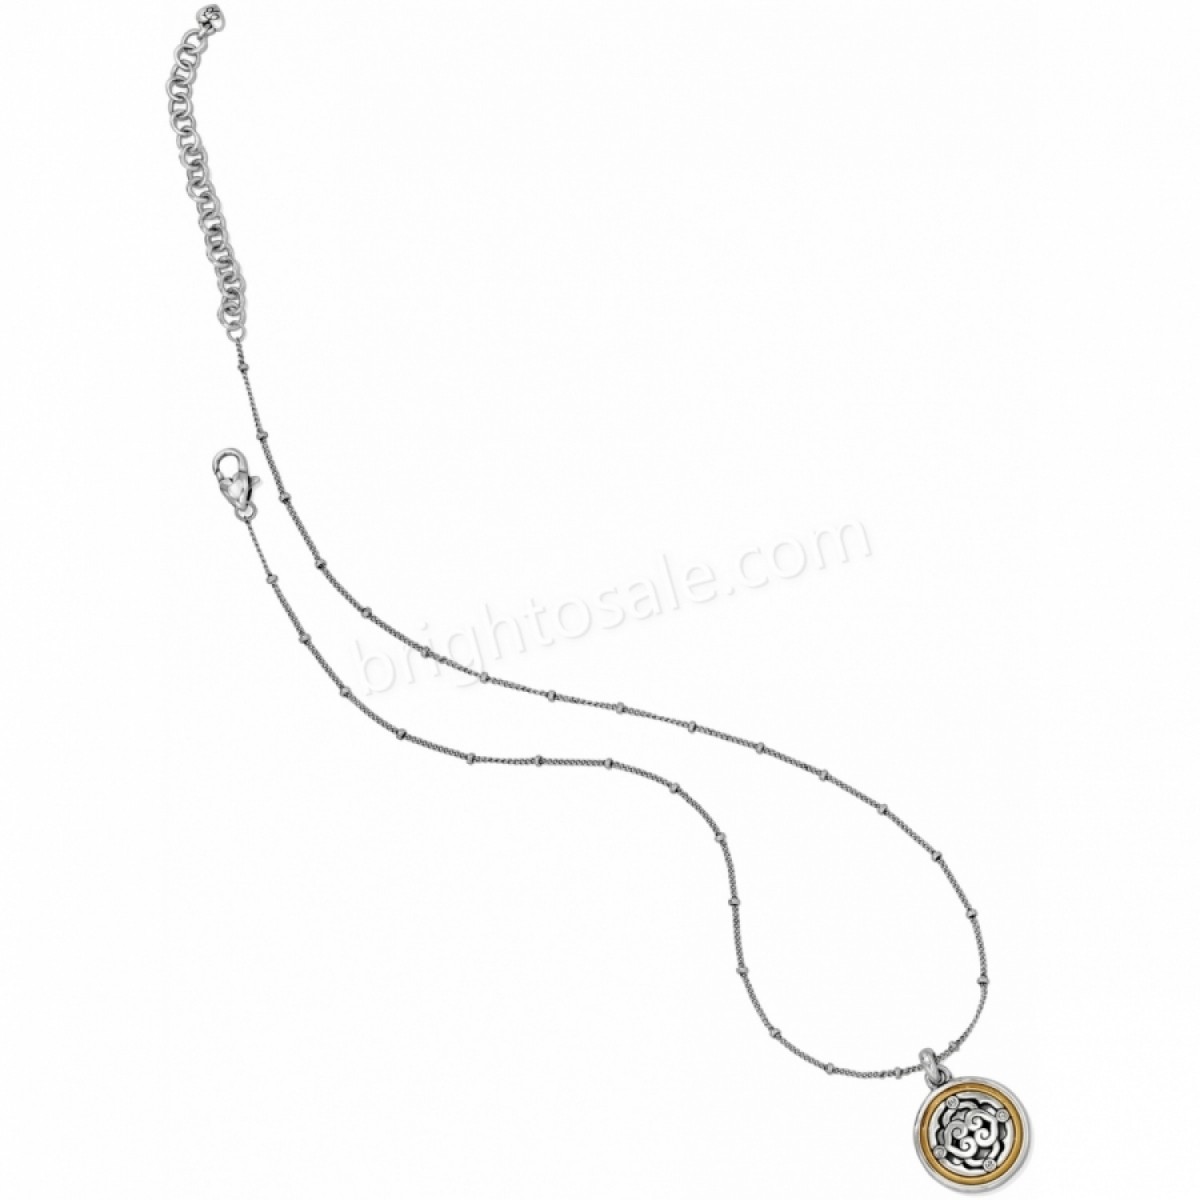 Brighton Collectibles & Online Discount Intrigue Small Necklace - -2